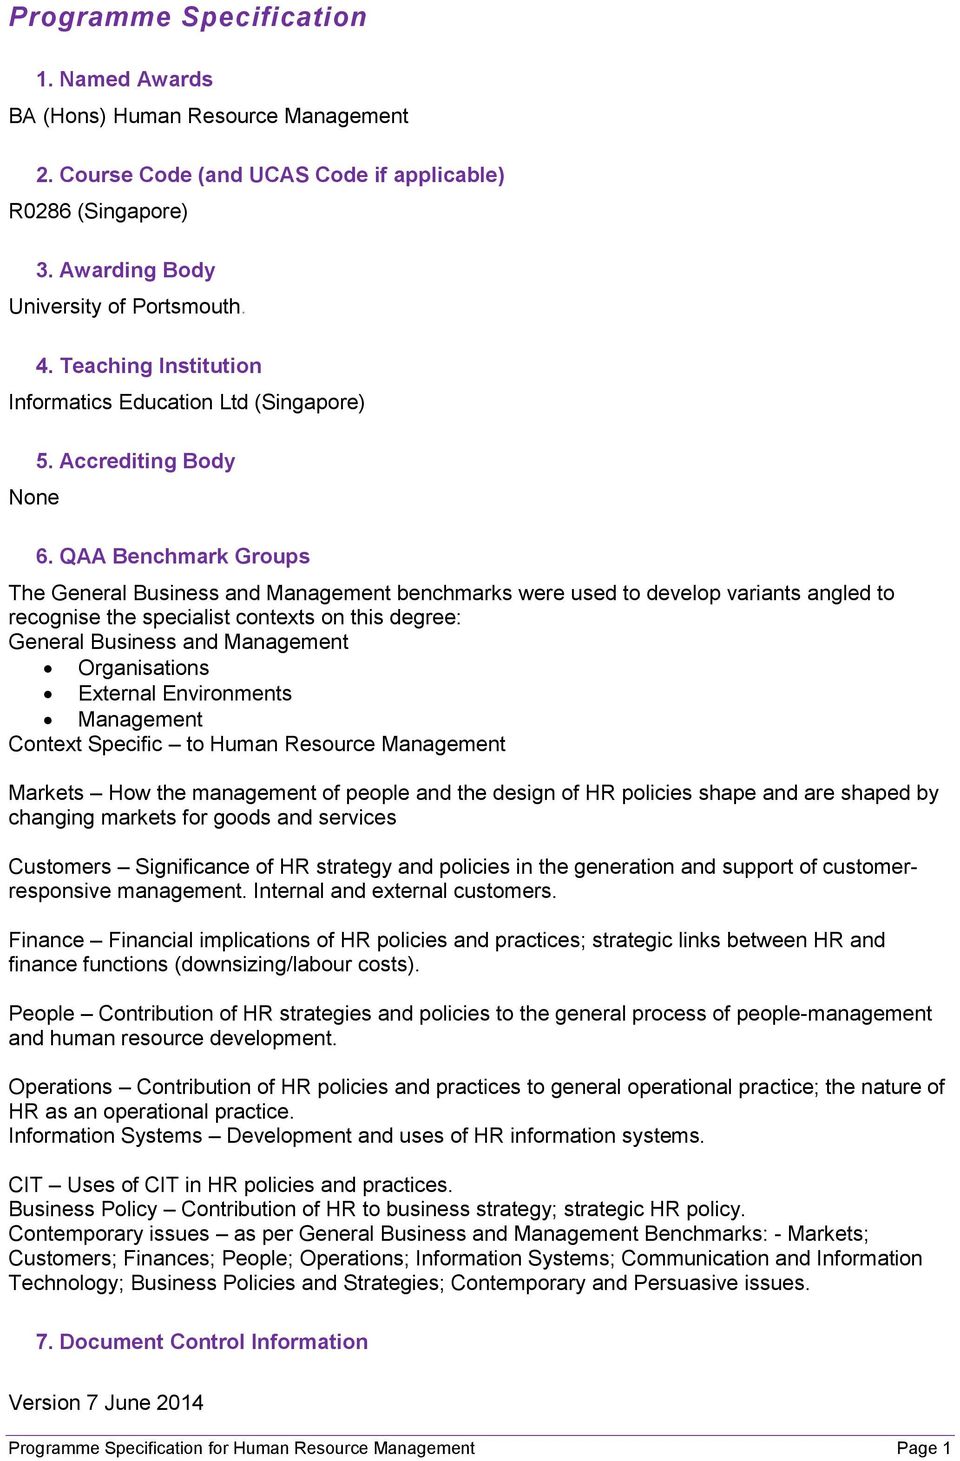 QAA Benchmark Groups The General Business and Management benchmarks were used to develop variants angled to recognise the specialist contexts on this degree: General Business and Management